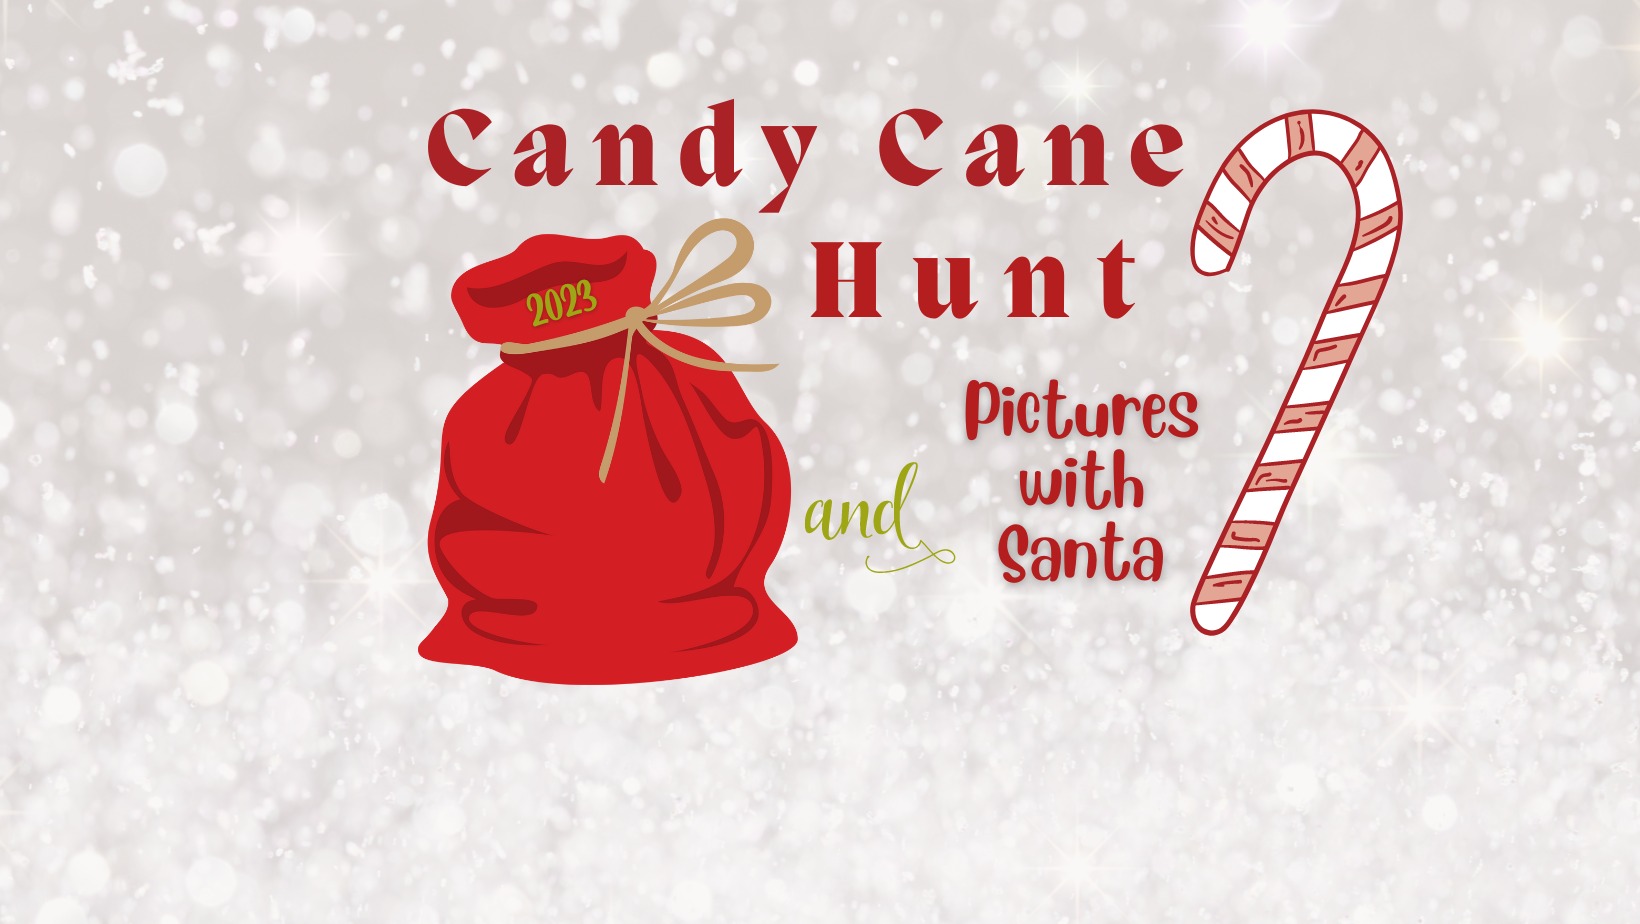 Candy cane hunt pictures with santa.